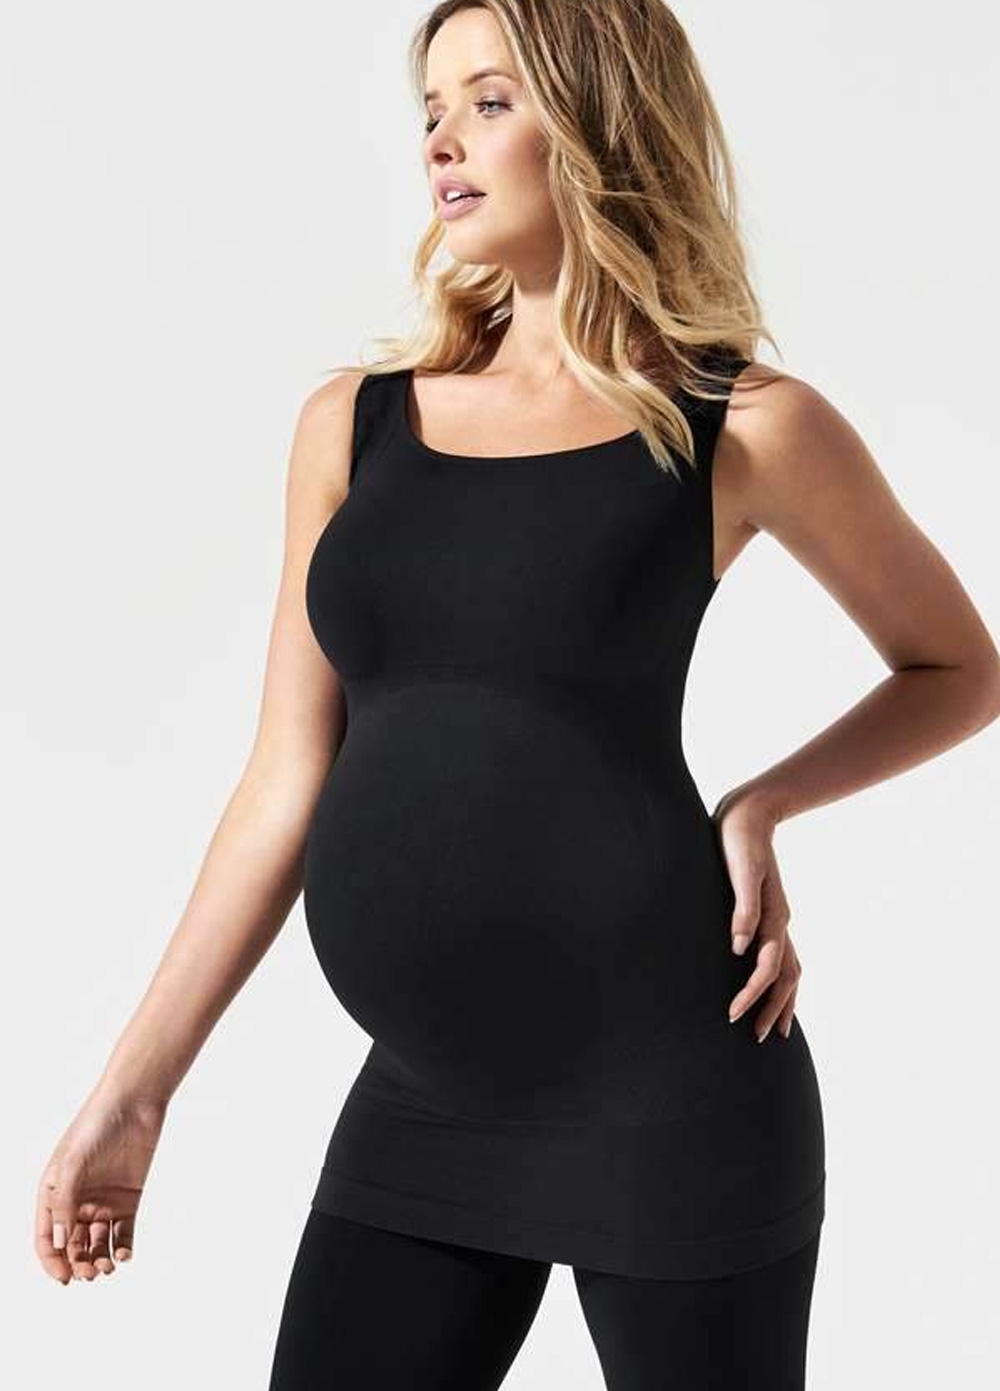 BLANQI Supportwear® Nursing & Maternity Clothes - Support & Style